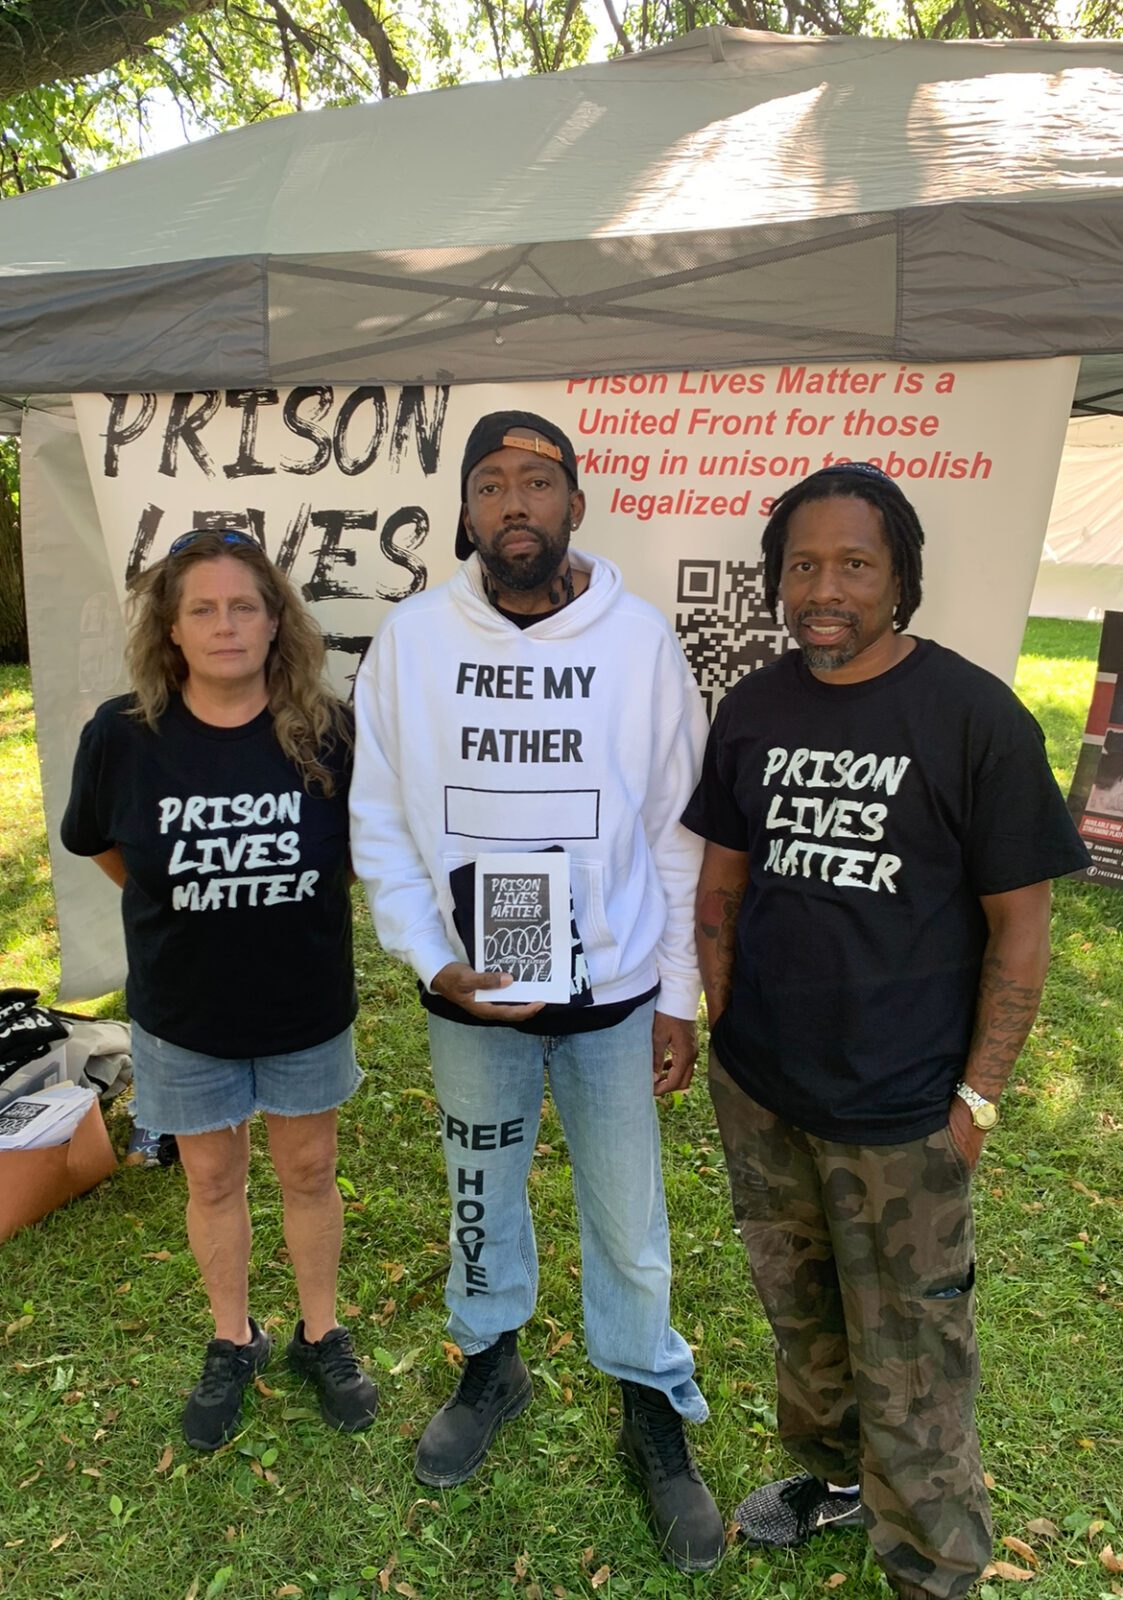 plm-loe-chicago-panelists-kelly-oxendine-larry-hoover-jr.-andy-williams-promote-webinars-at-new-afrikan-family-day-picnic-1-scaled, Kwame ‘Beans’ Shakur: Call to Action for National Unification, Abolition Now! 